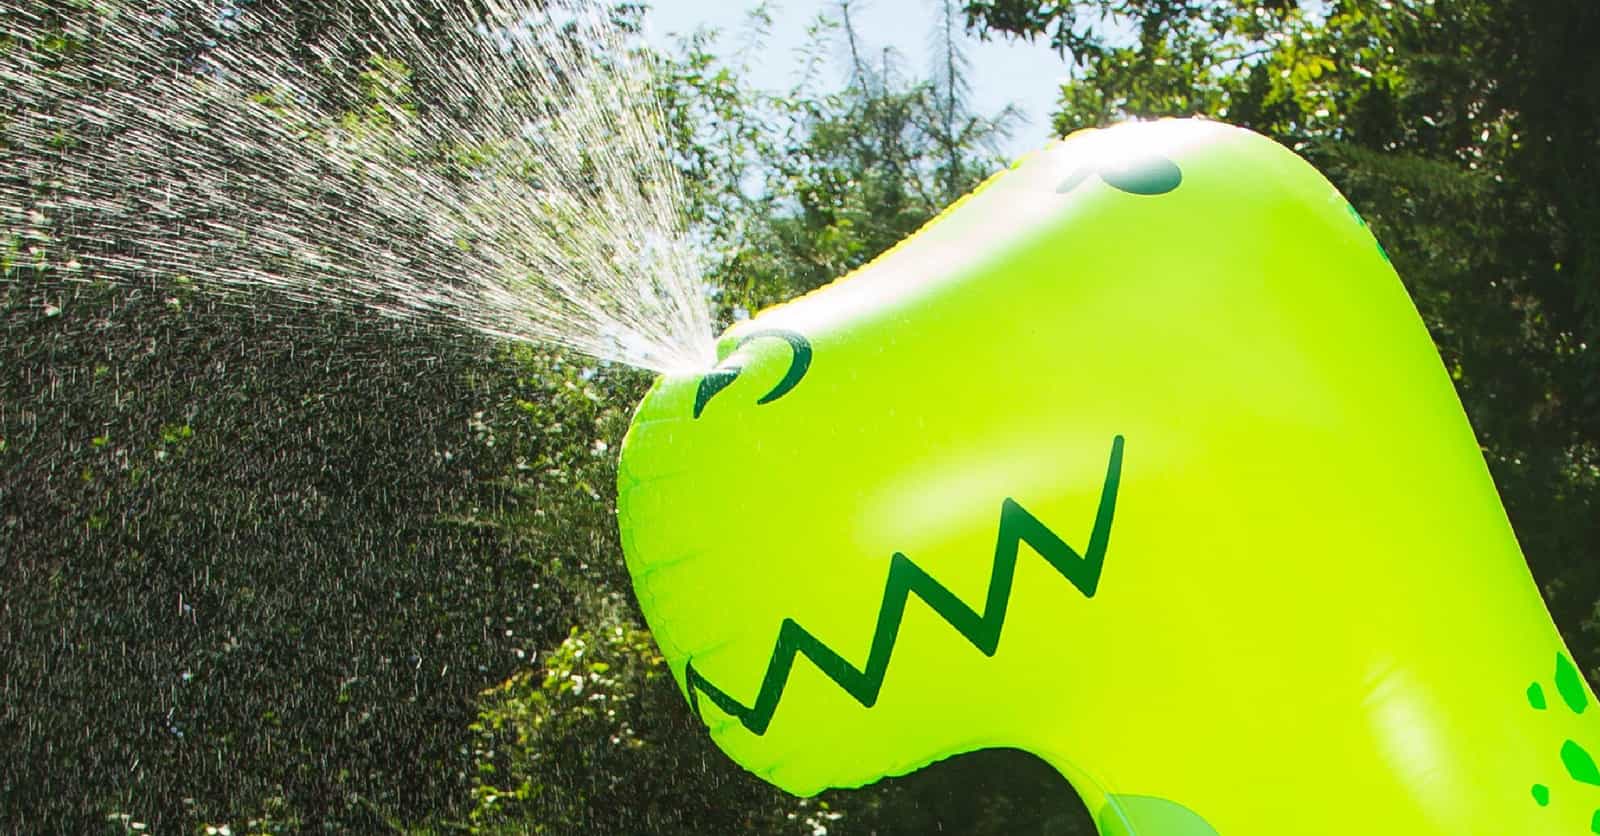 13 Backyard Water Toys That Are Sure To Keep The Kiddos Busy (For A Few Mins, At Least)